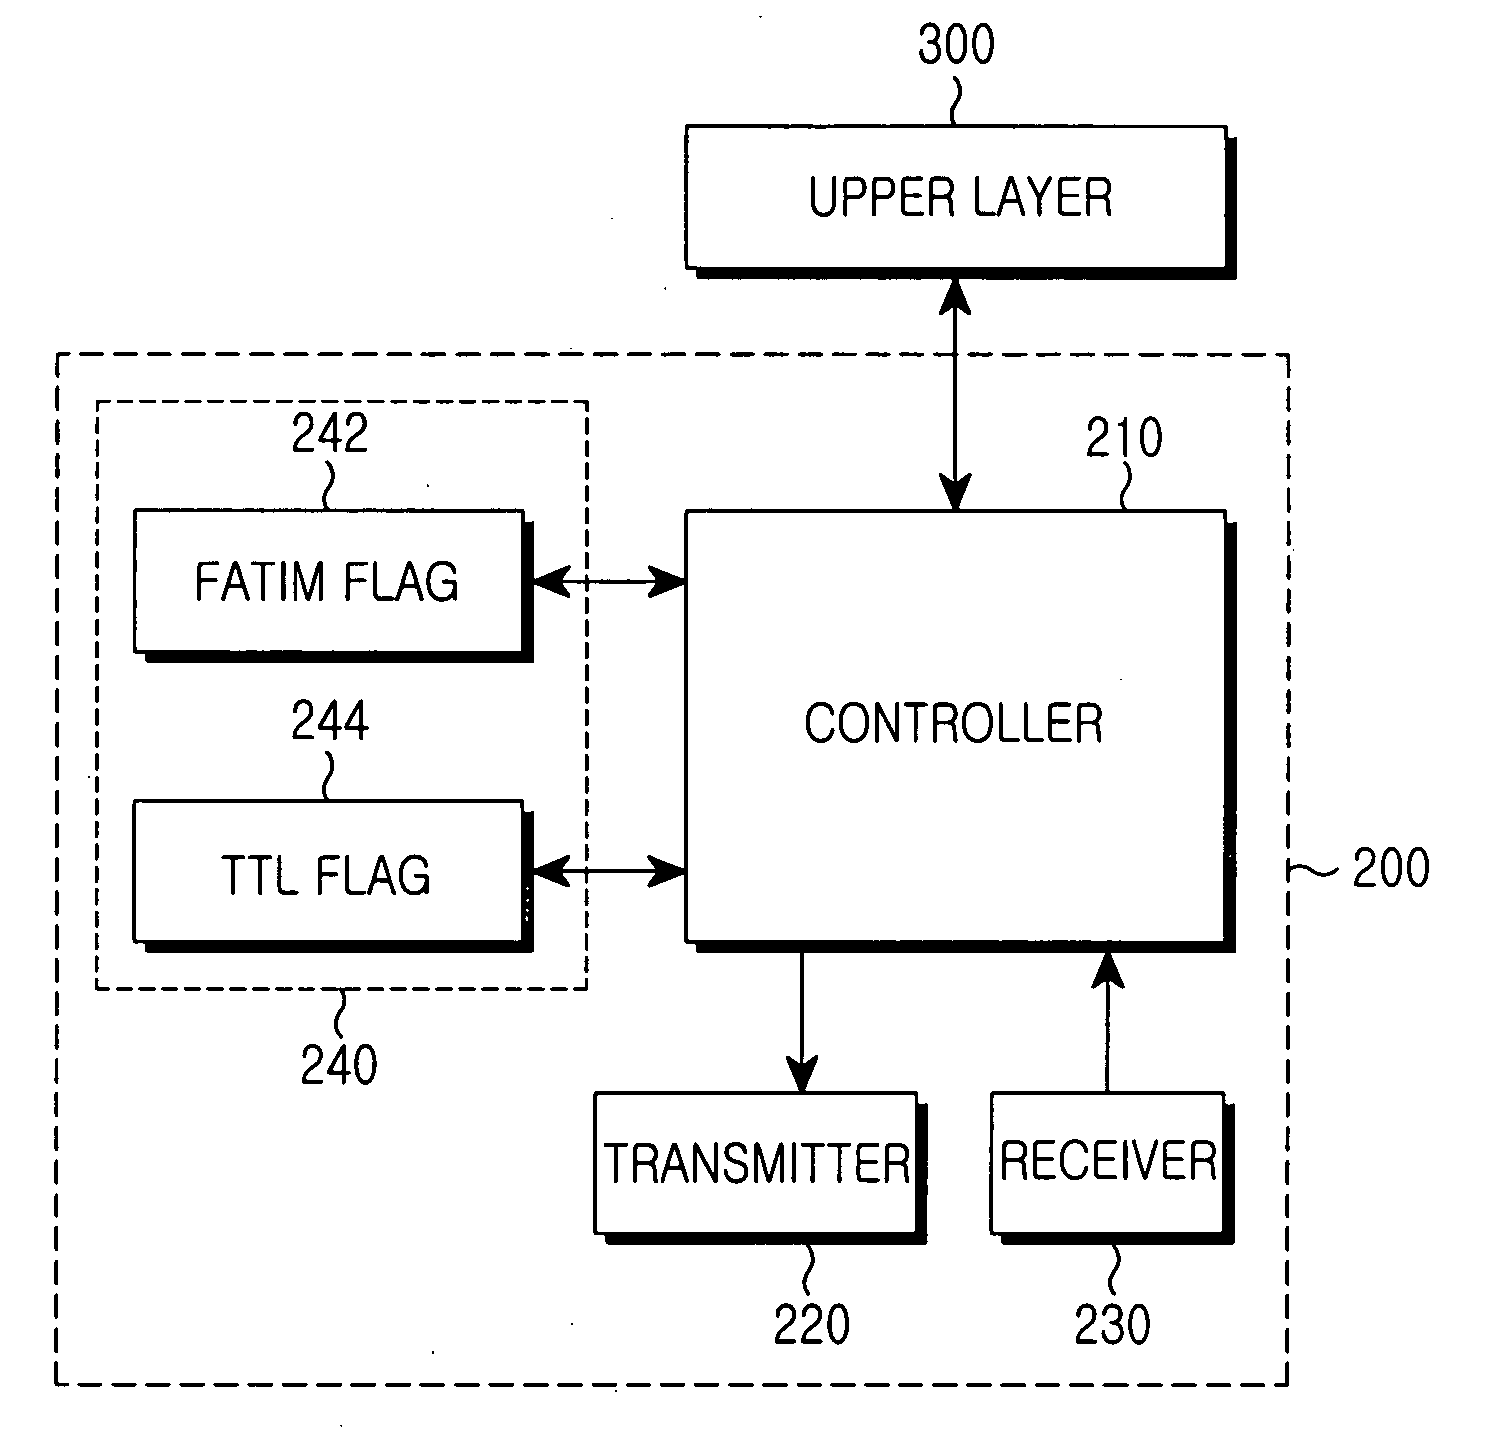 Method for transmitting FATIM in mobile ad hoc network and medium access control protocol layer module therefor